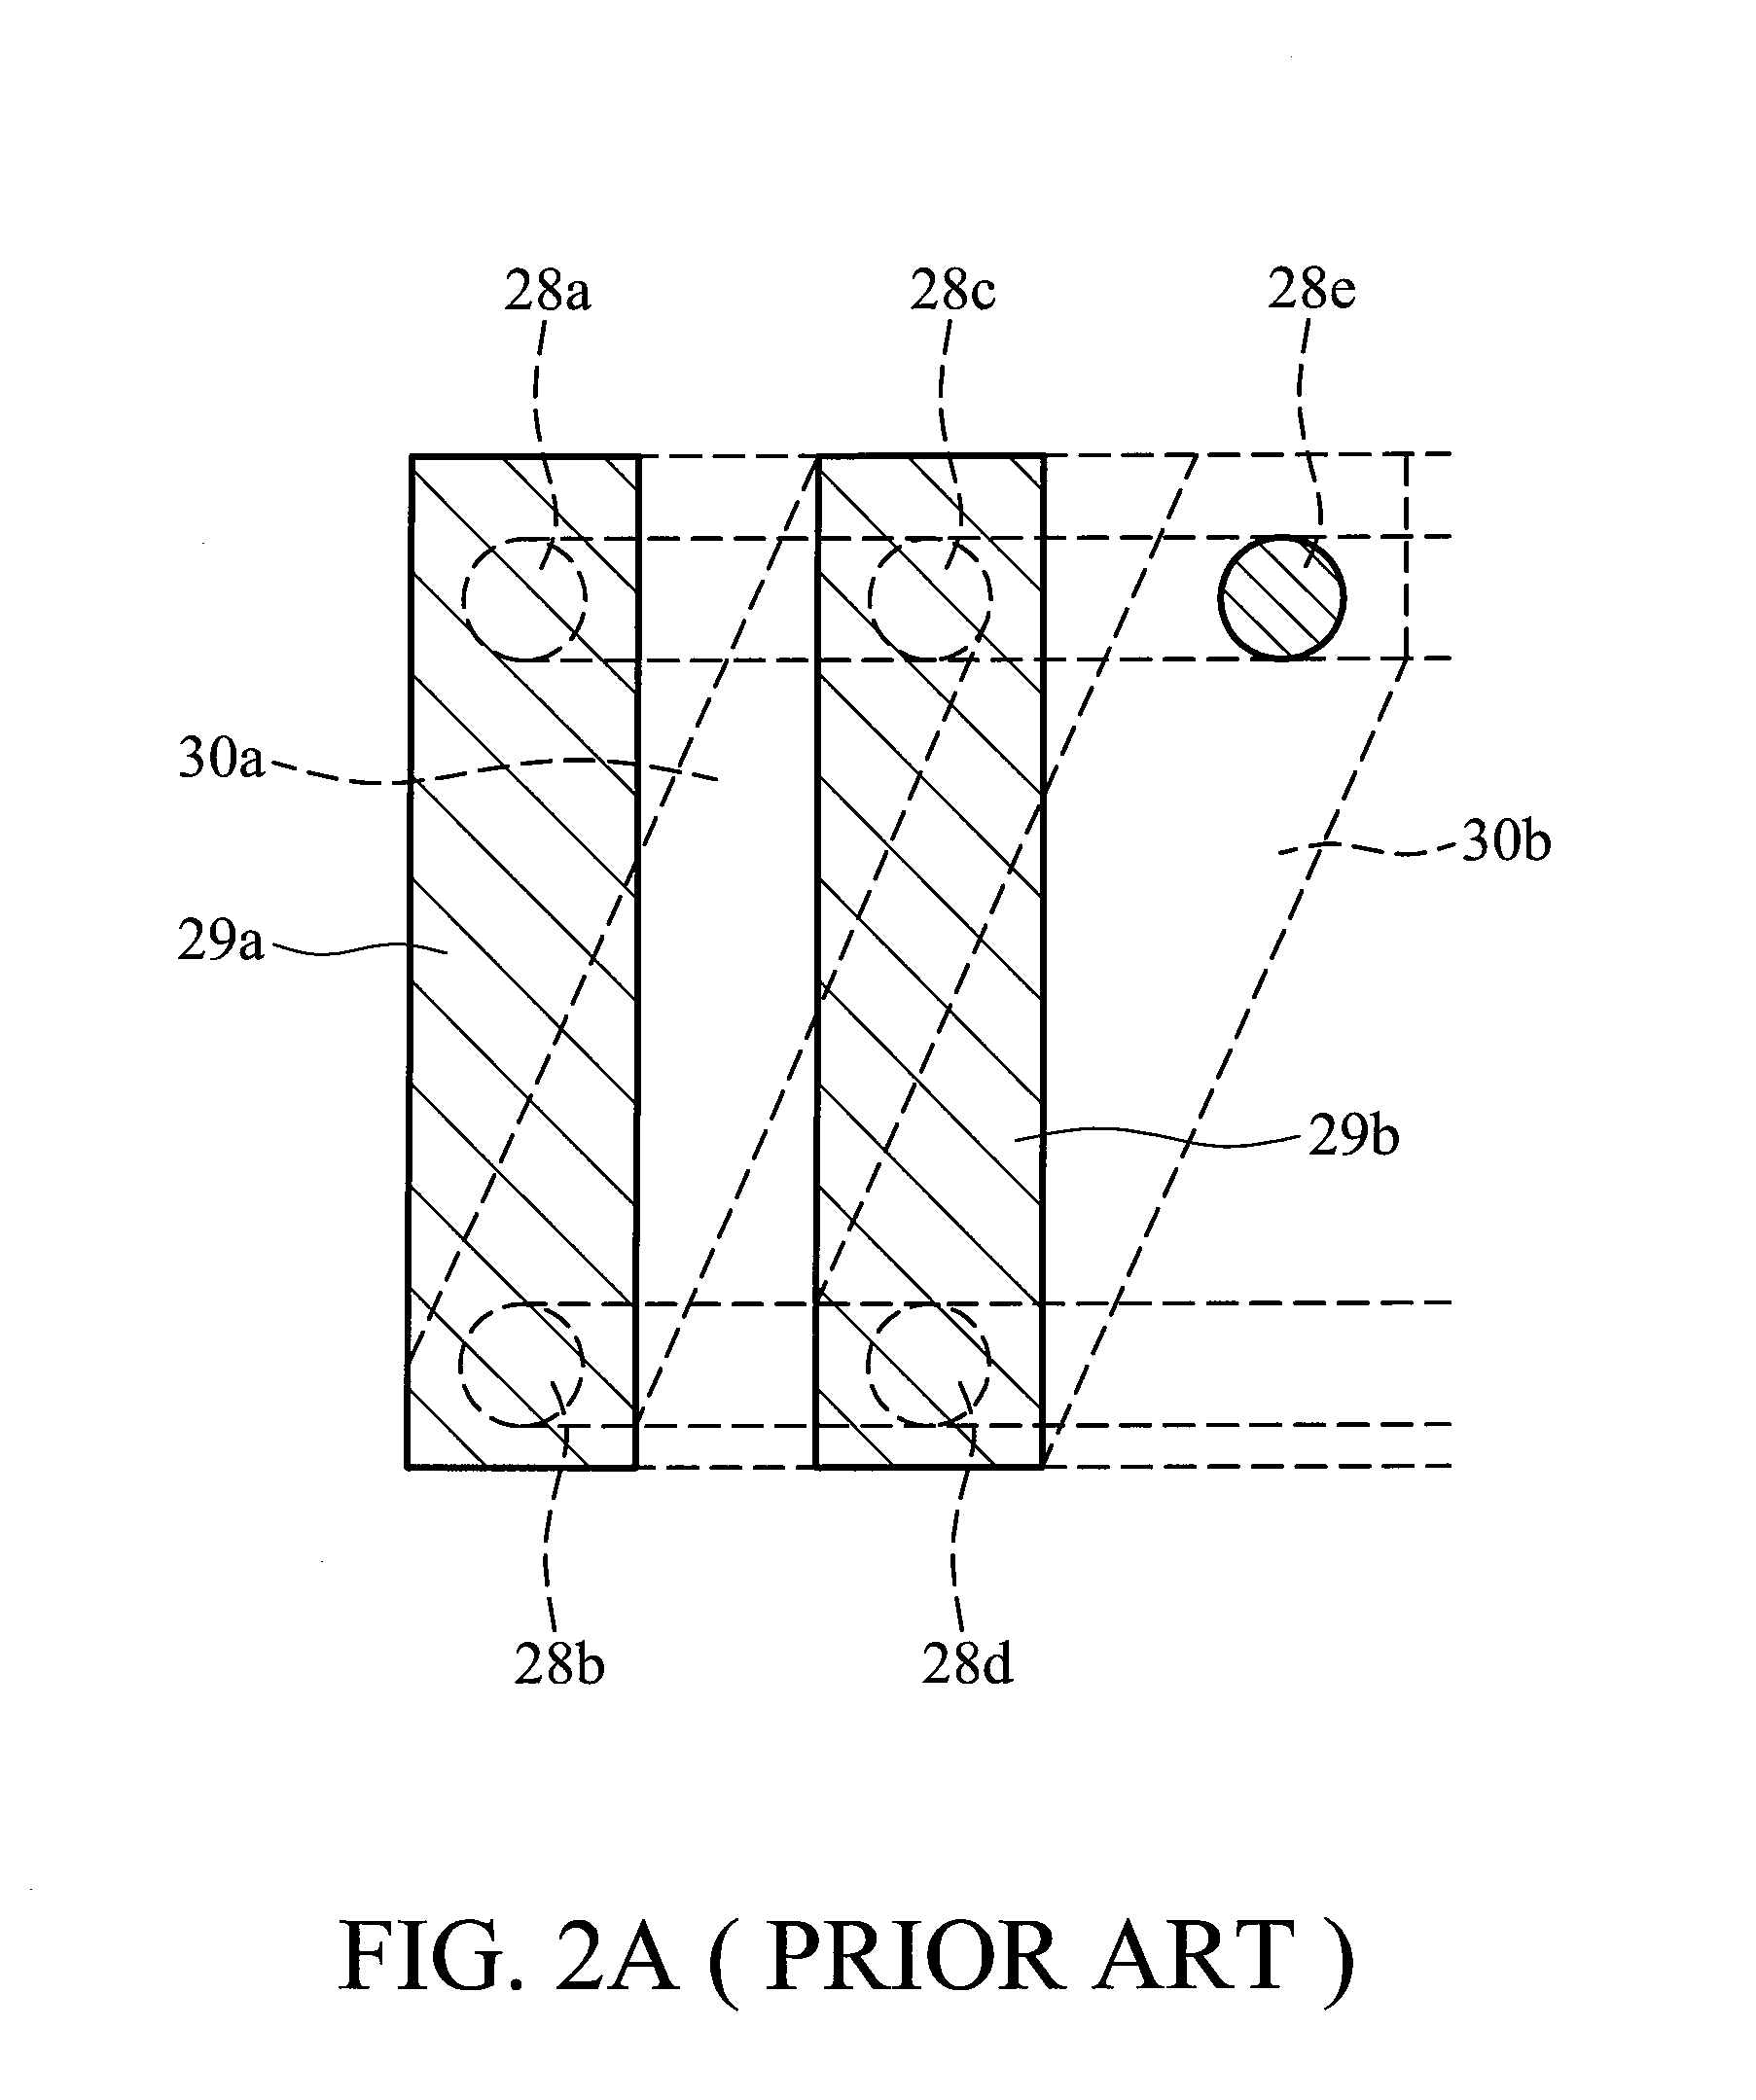 Inter-helix inductor devices